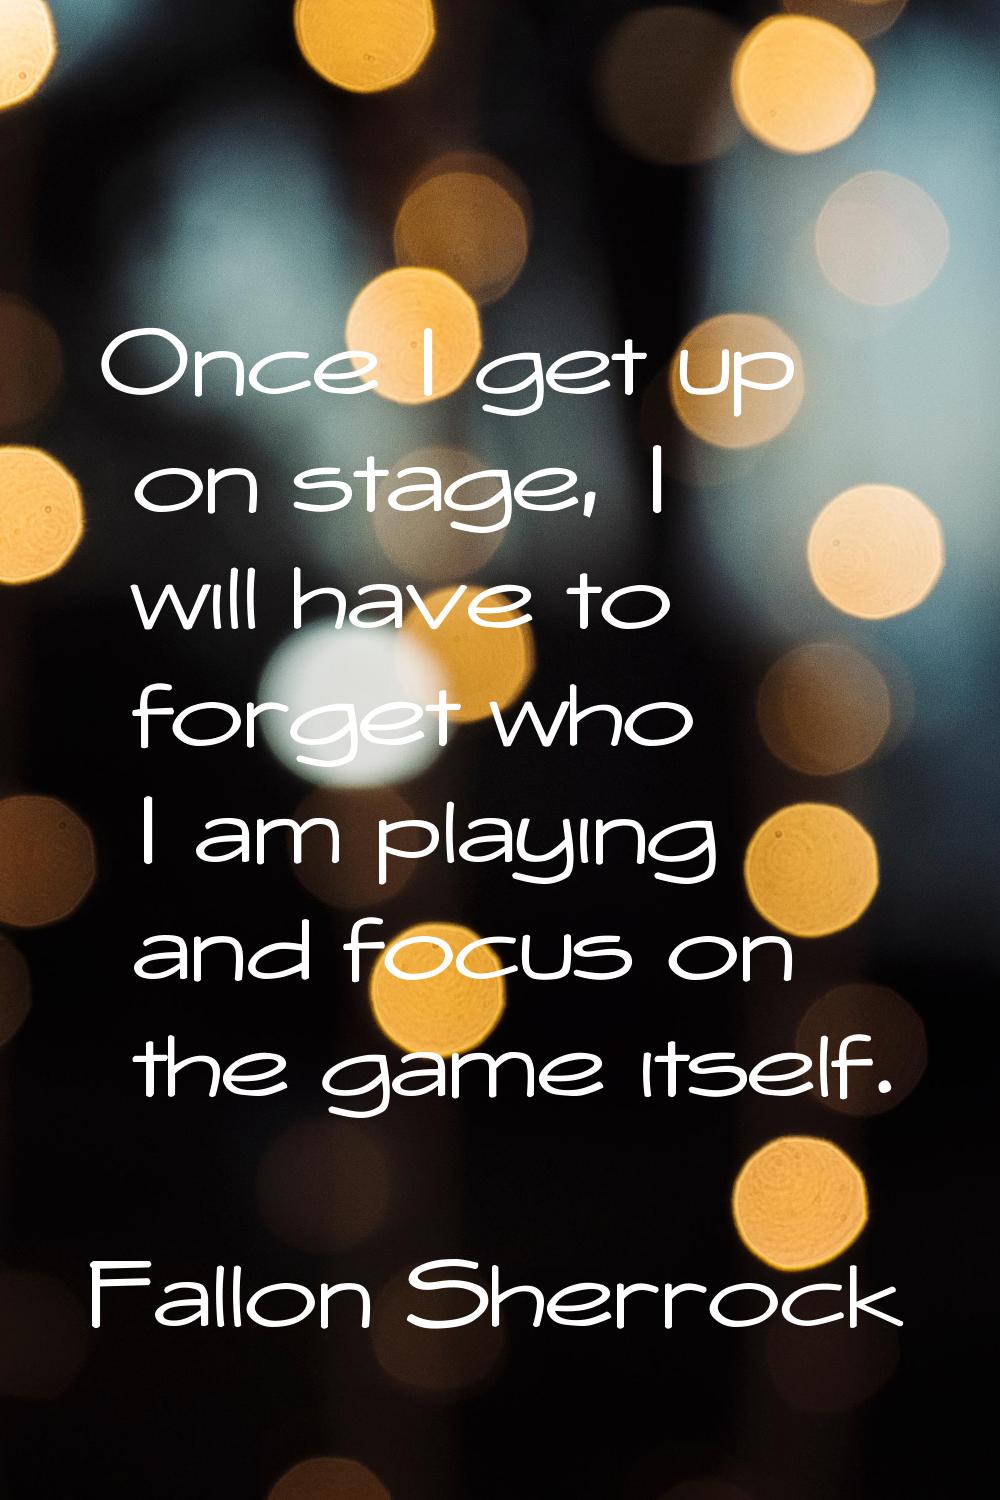 Once I get up on stage, I will have to forget who I am playing and focus on the game itself.